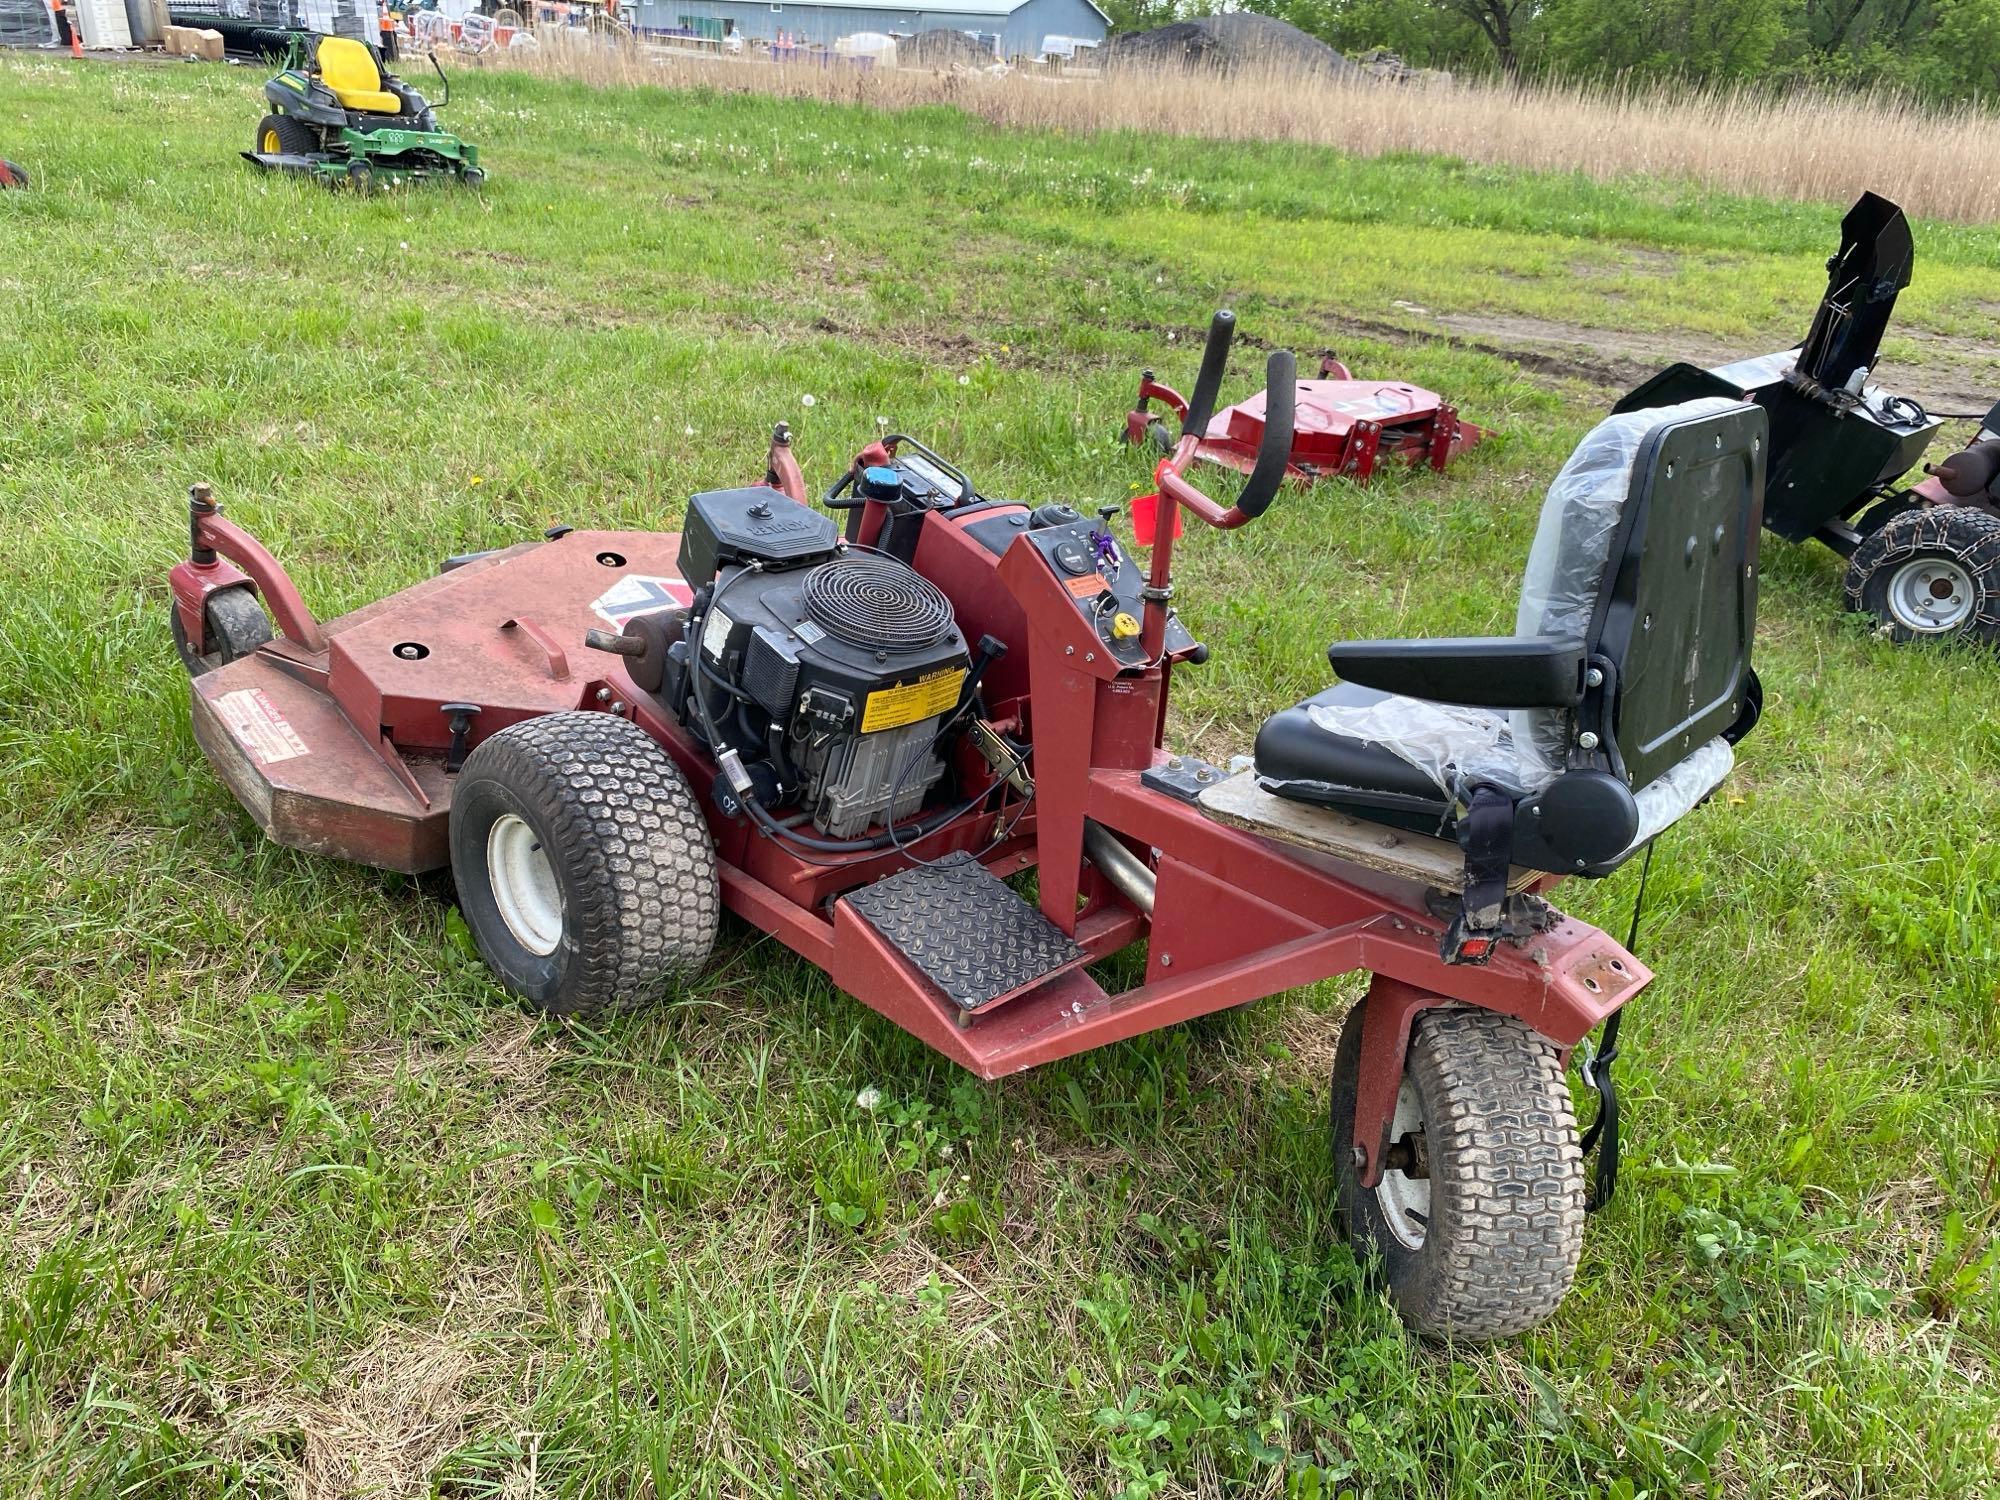 FERRIS PROCUT 61 COMMERCIAL MOWER SN-8148 powered by gas engine, equipped with 51in. Cutting deck,